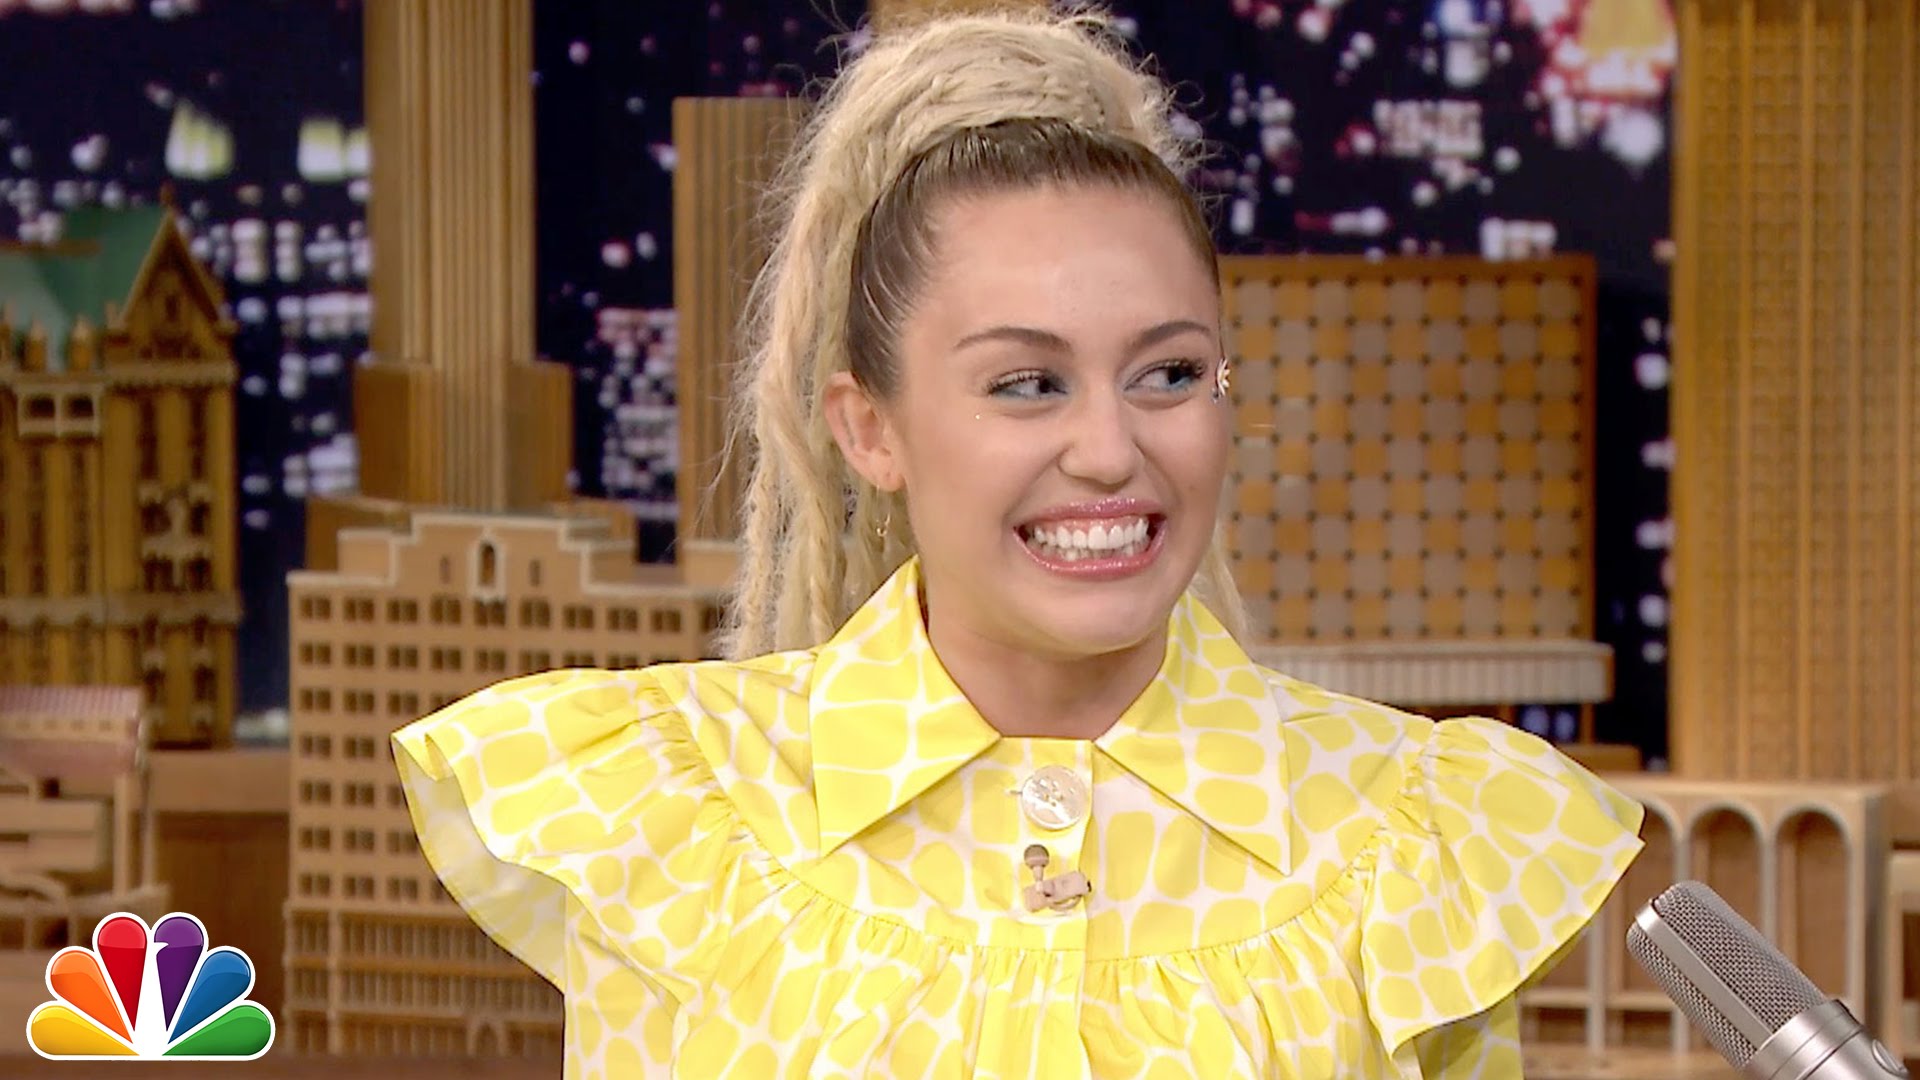 Emotional Interview with Miley Cyrus